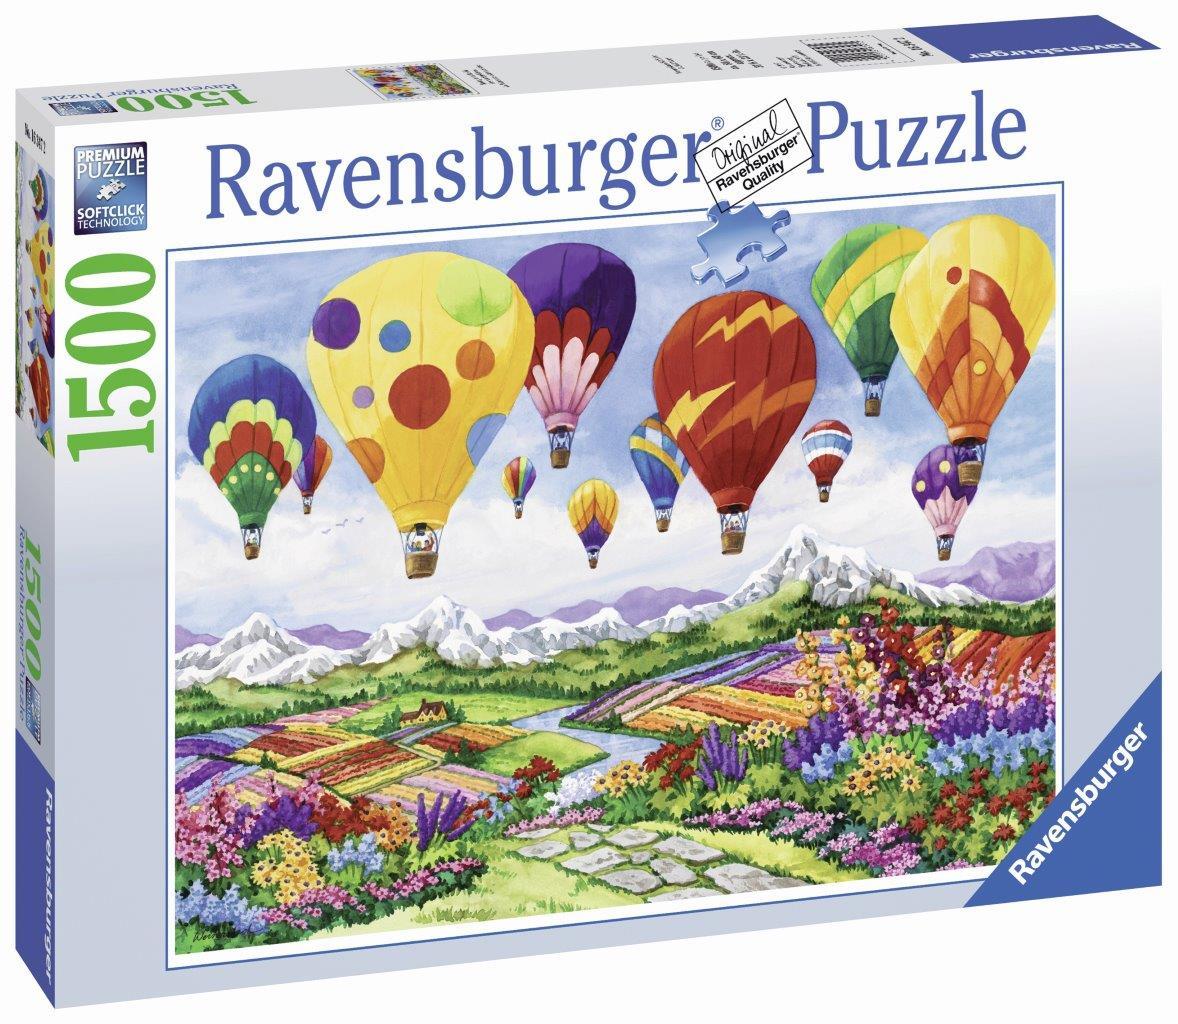 Spring Is In The Air Puzzle 1500pc (Ravensburger Puzzle)